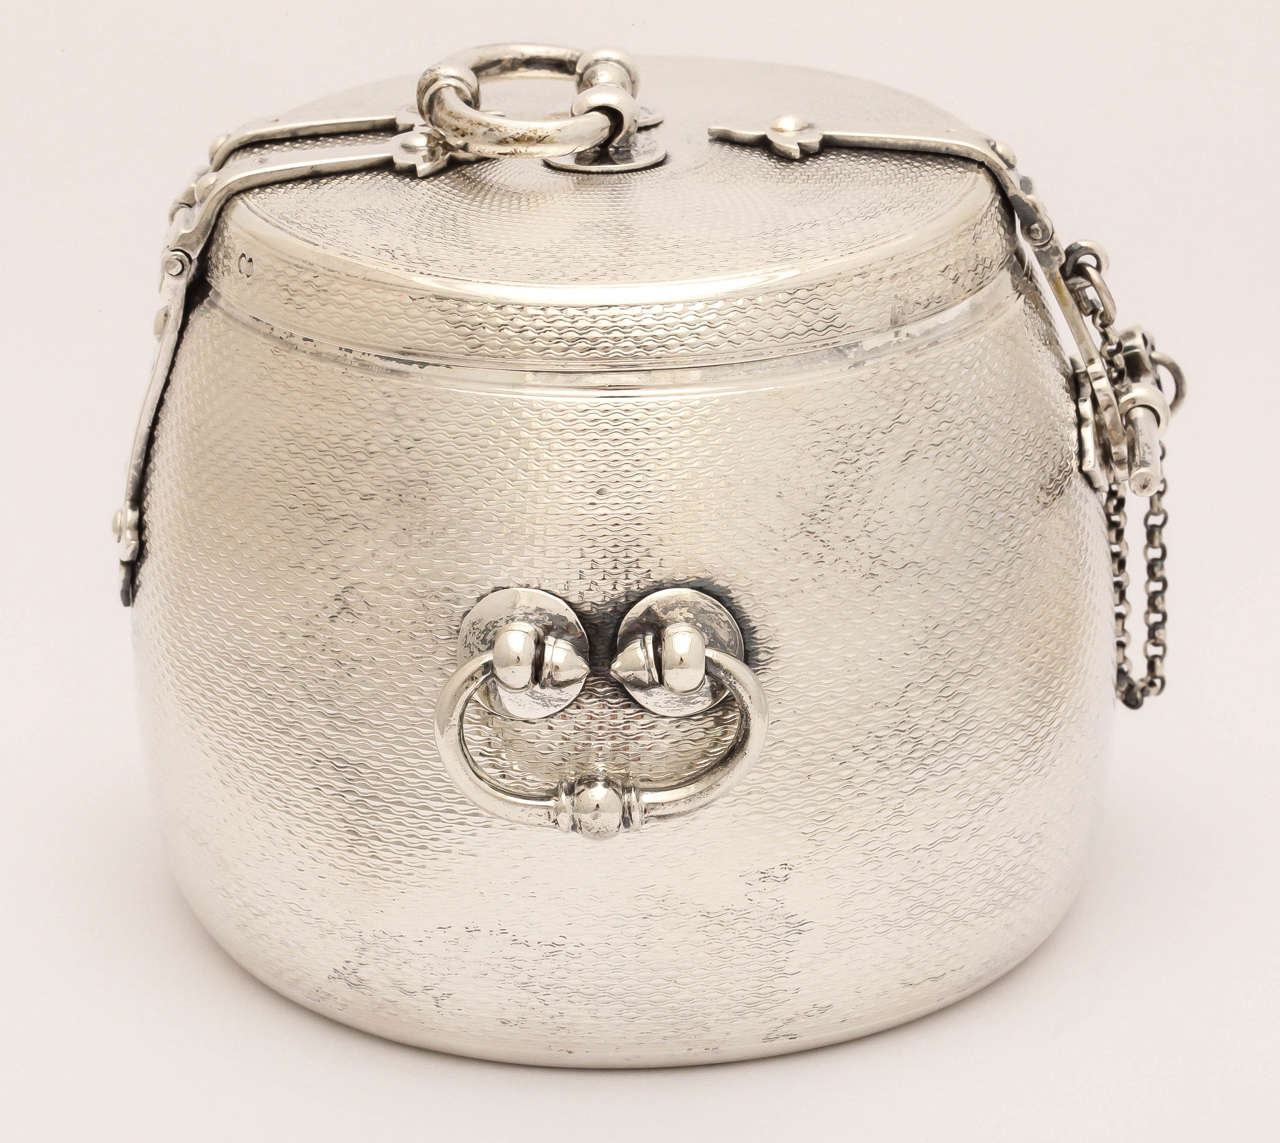 Exceptional quality English tea caddy.  

Retailed by Storr & Mortimer